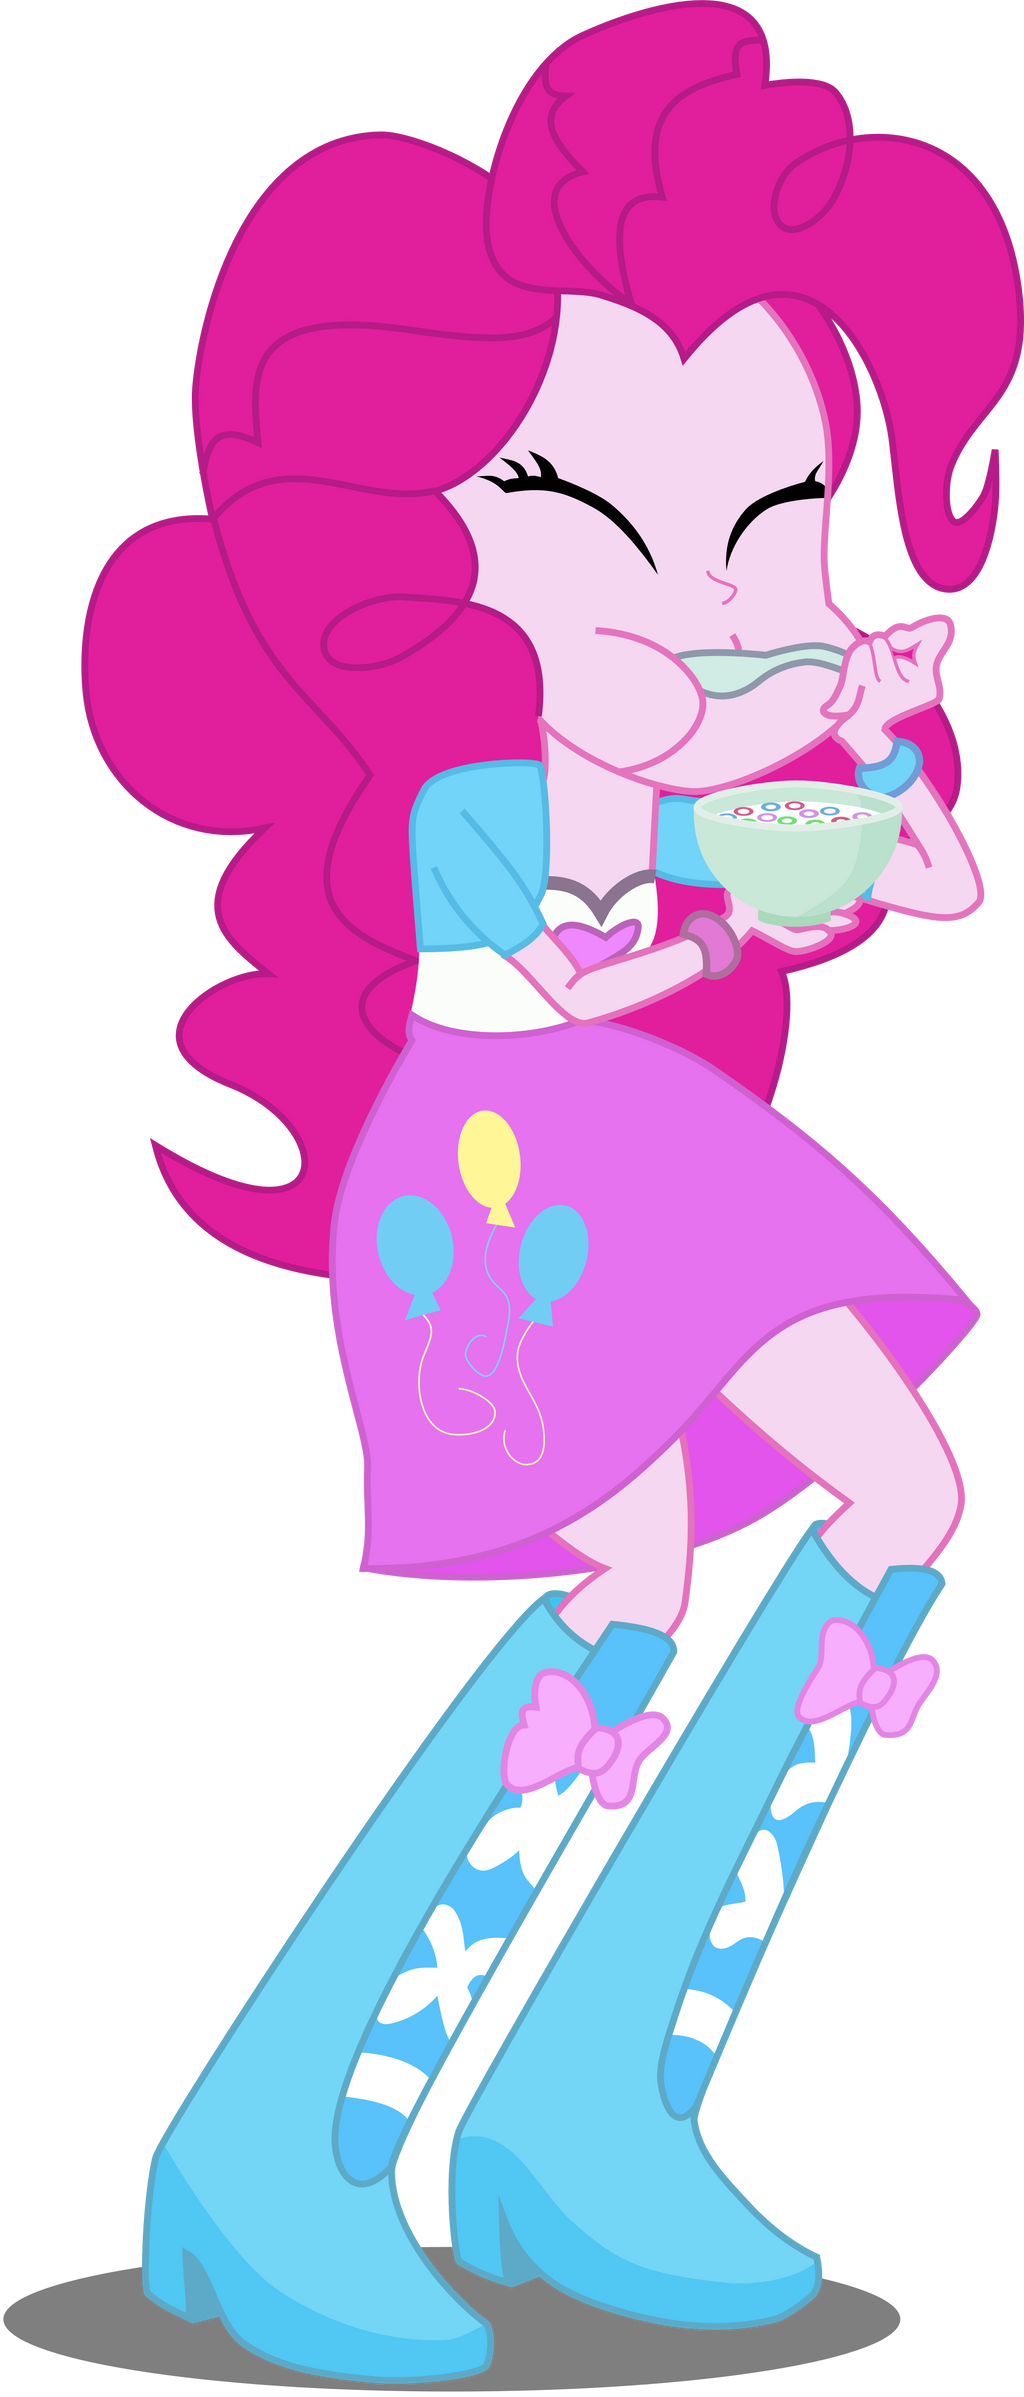 Pinkie Pie eating a bowl of cereal